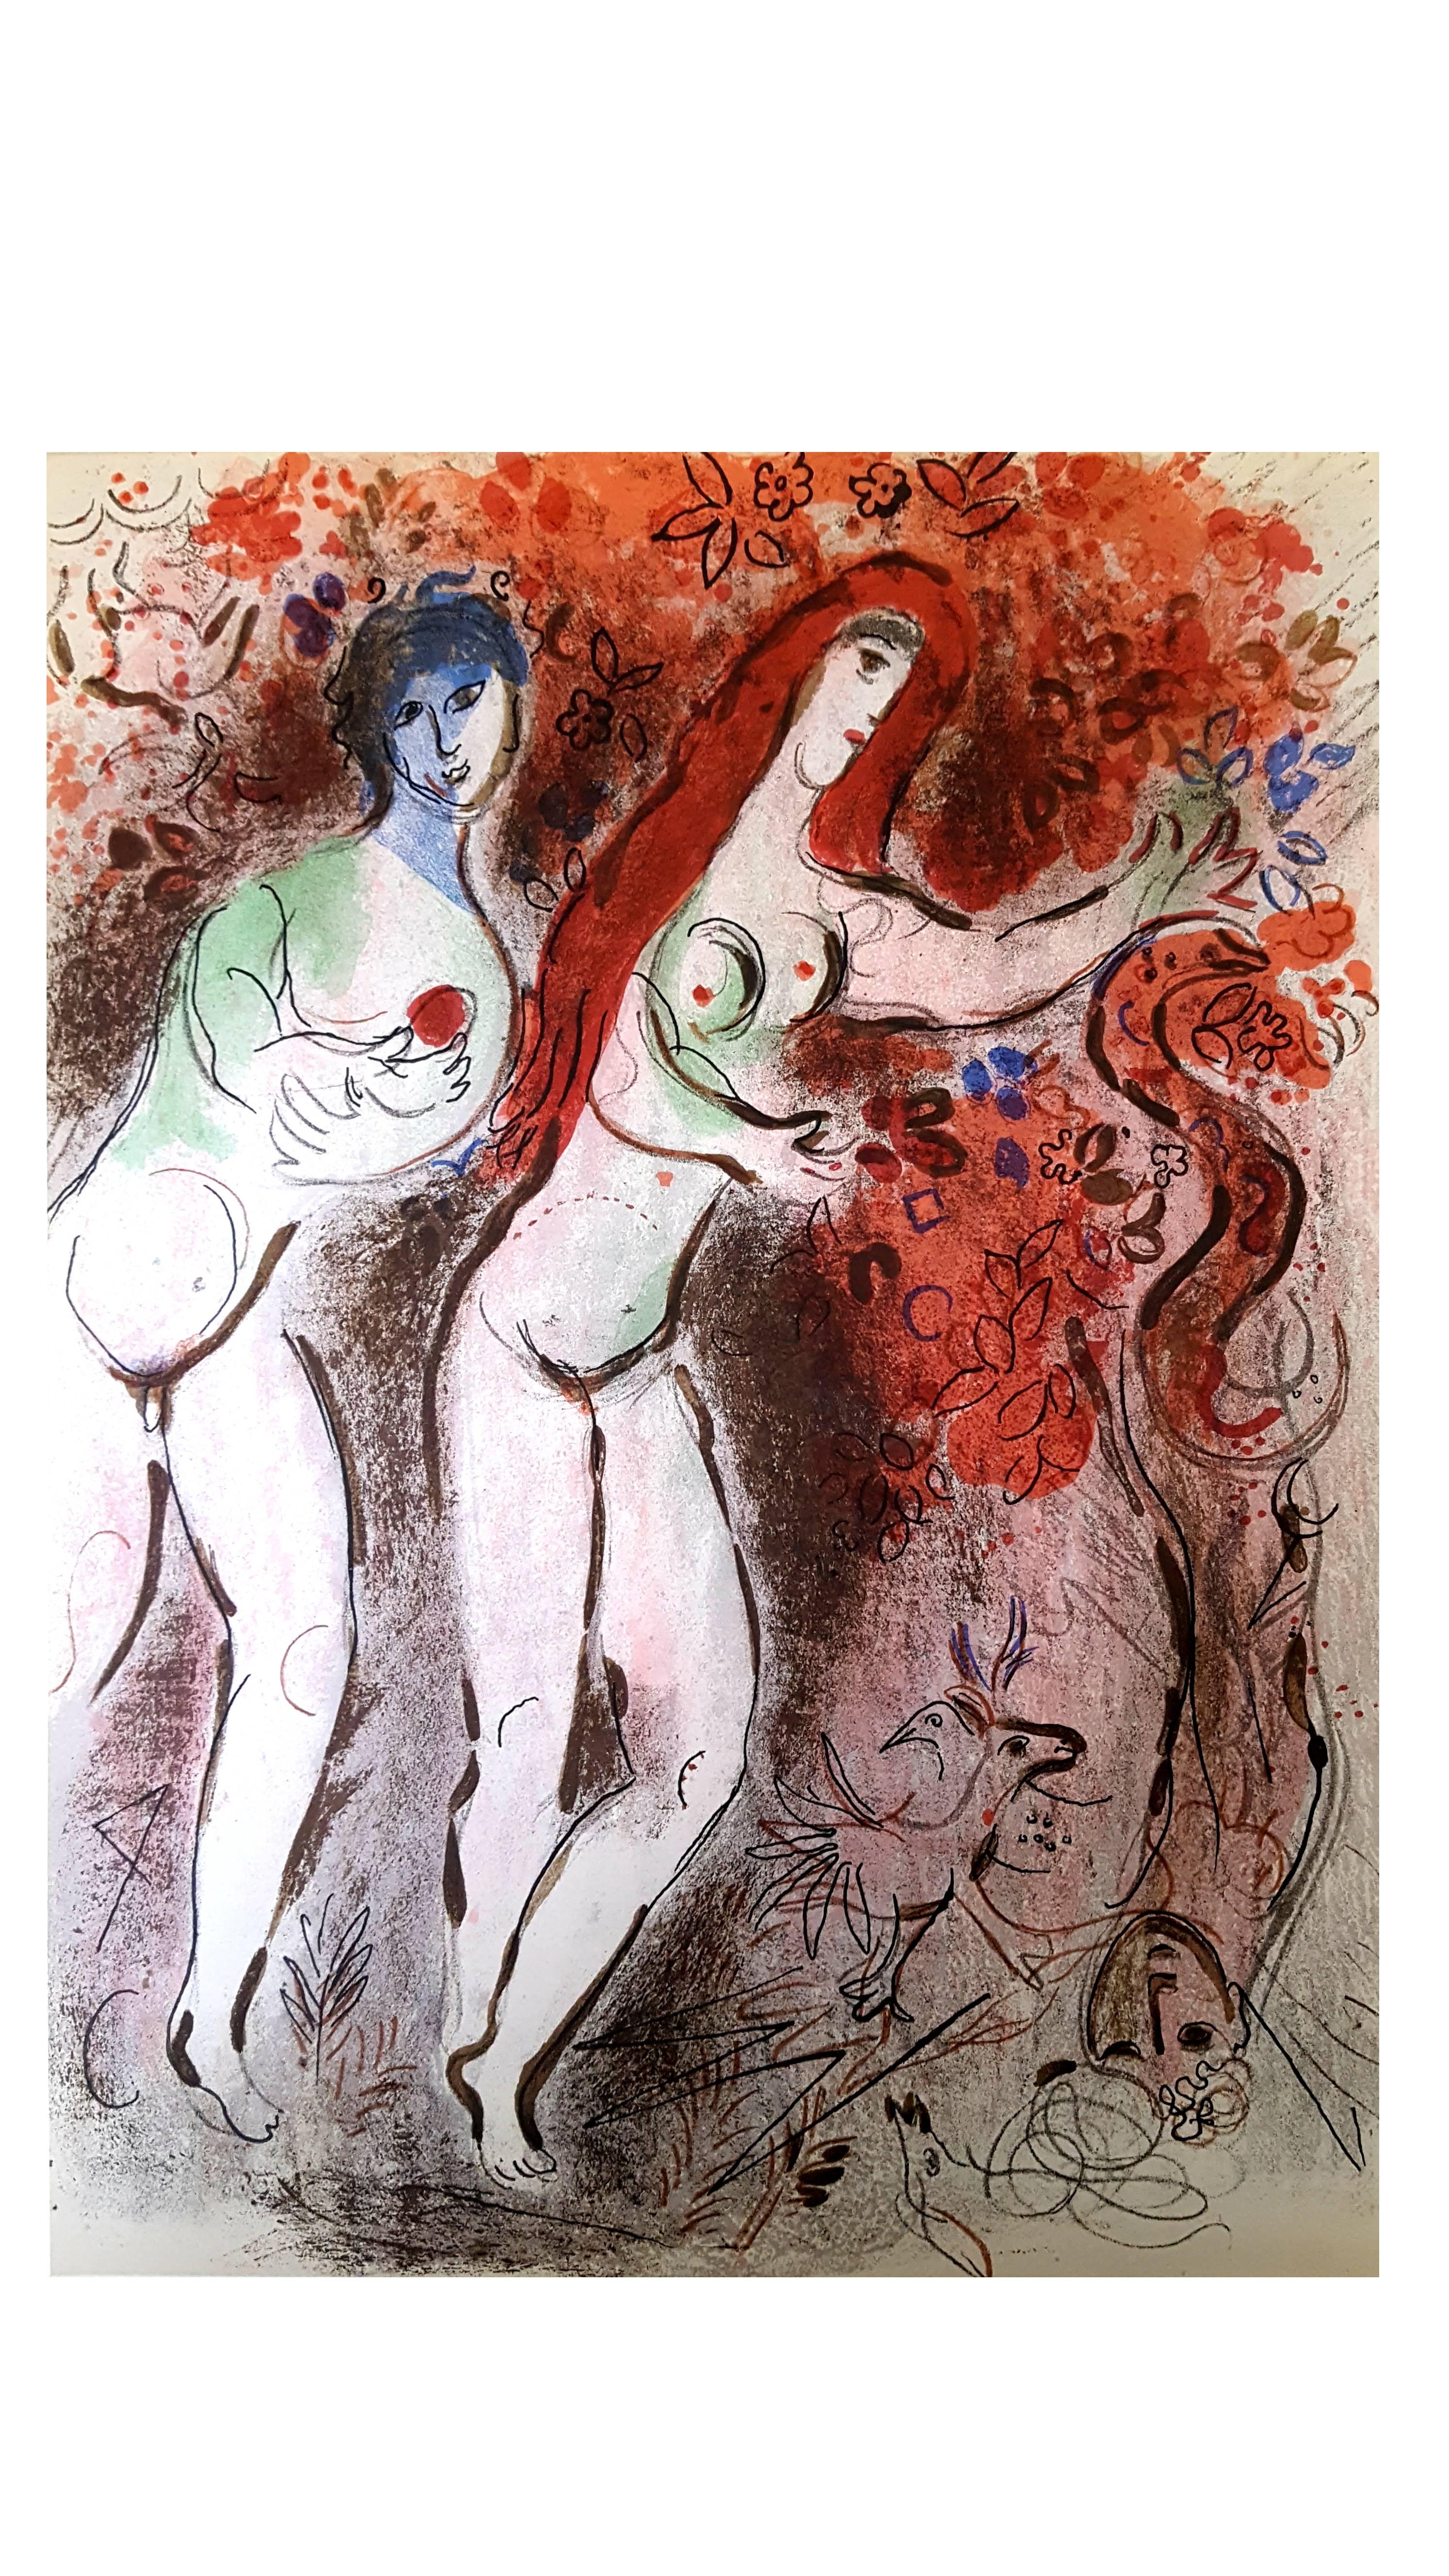 Marc Chagall - The Bible - Adam and Eve - Original Lithograph